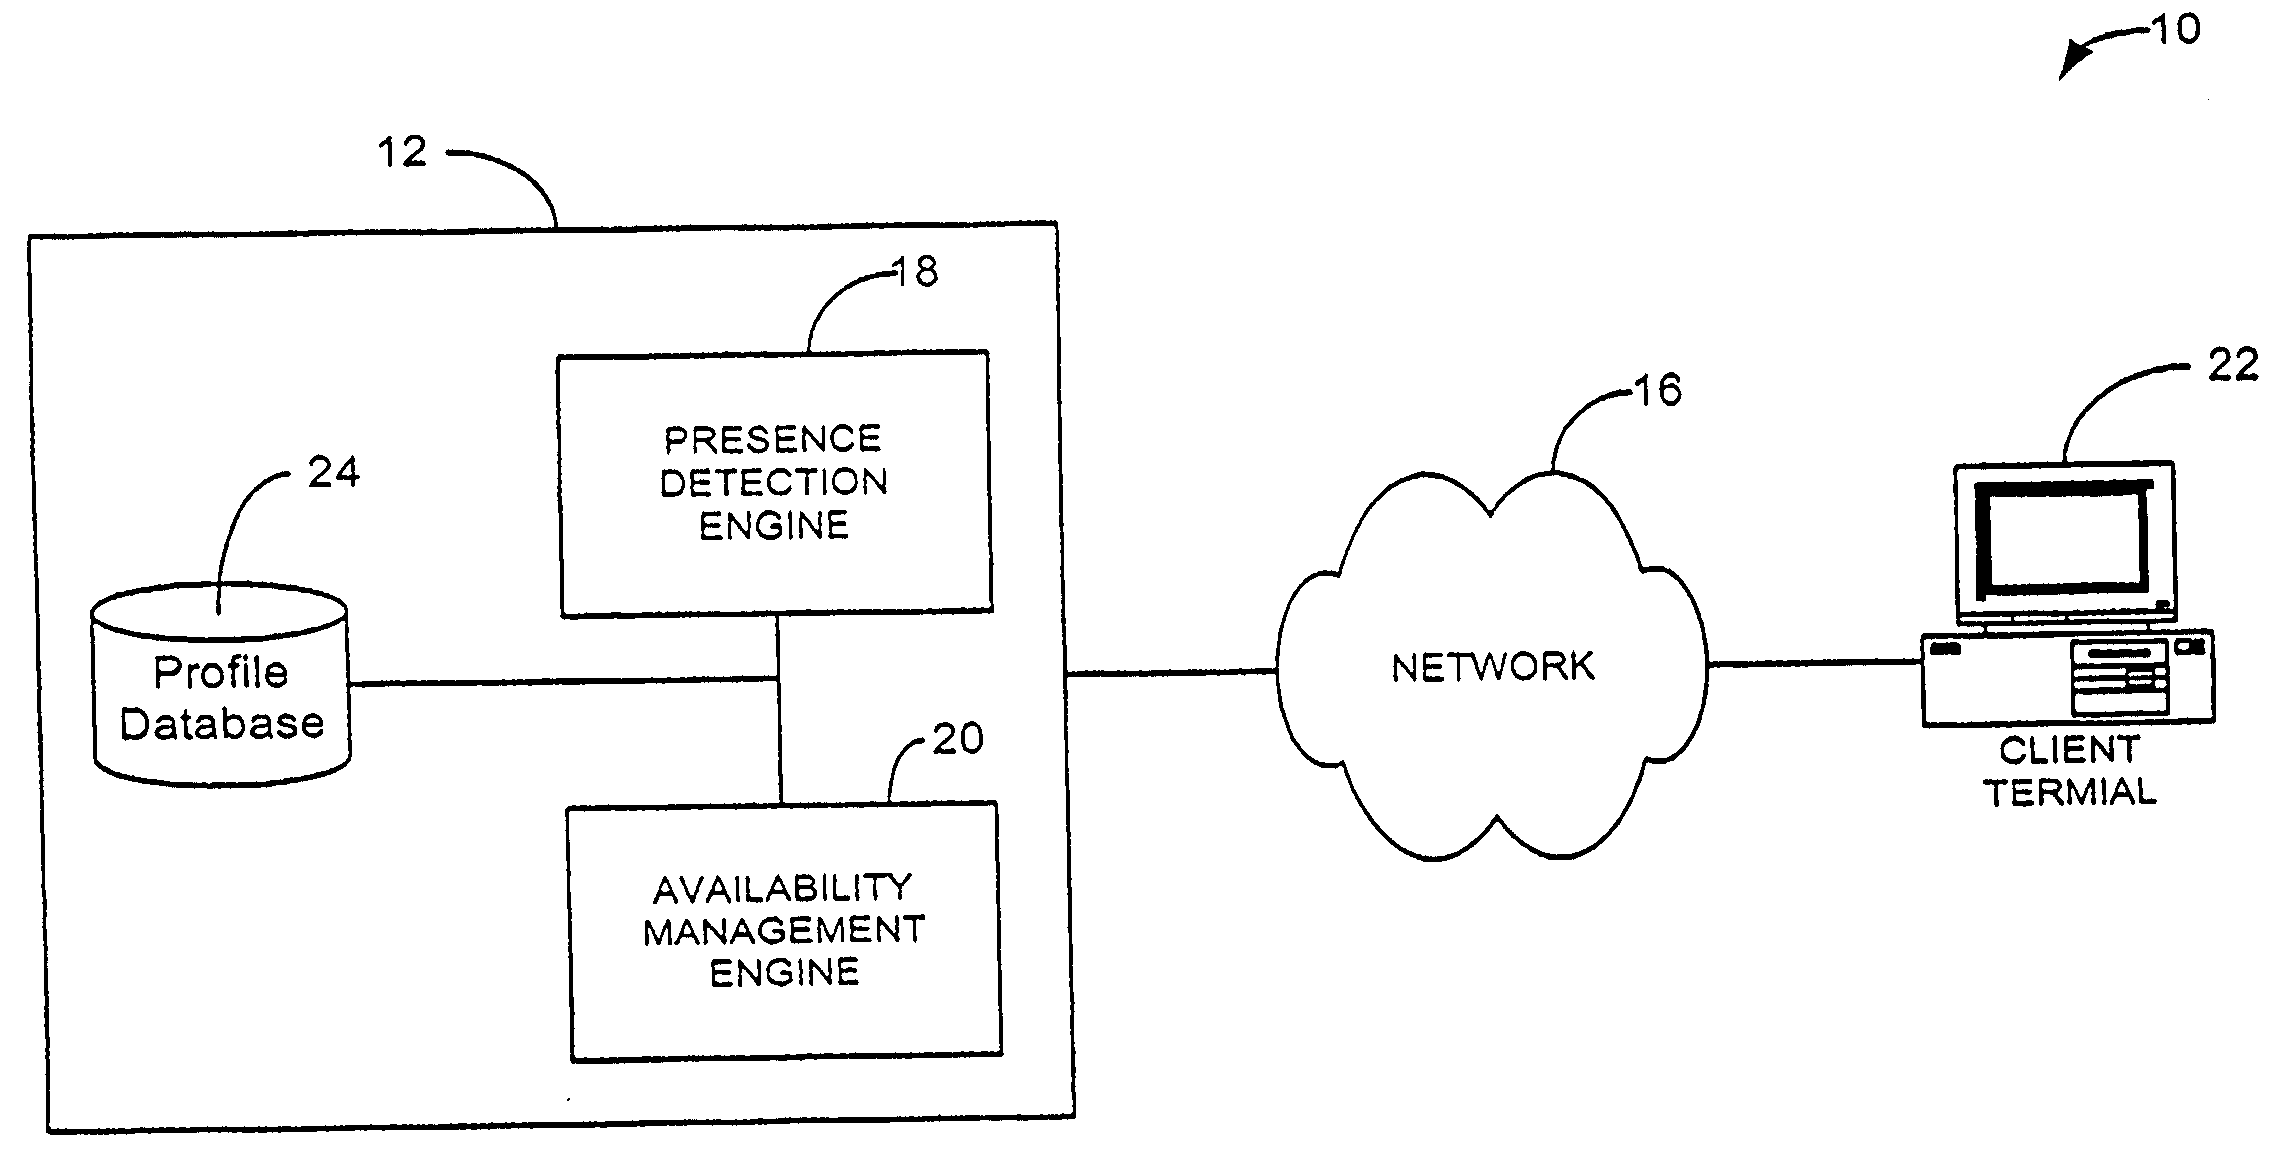 System and method for filtering unavailable devices in a presence and availability management system